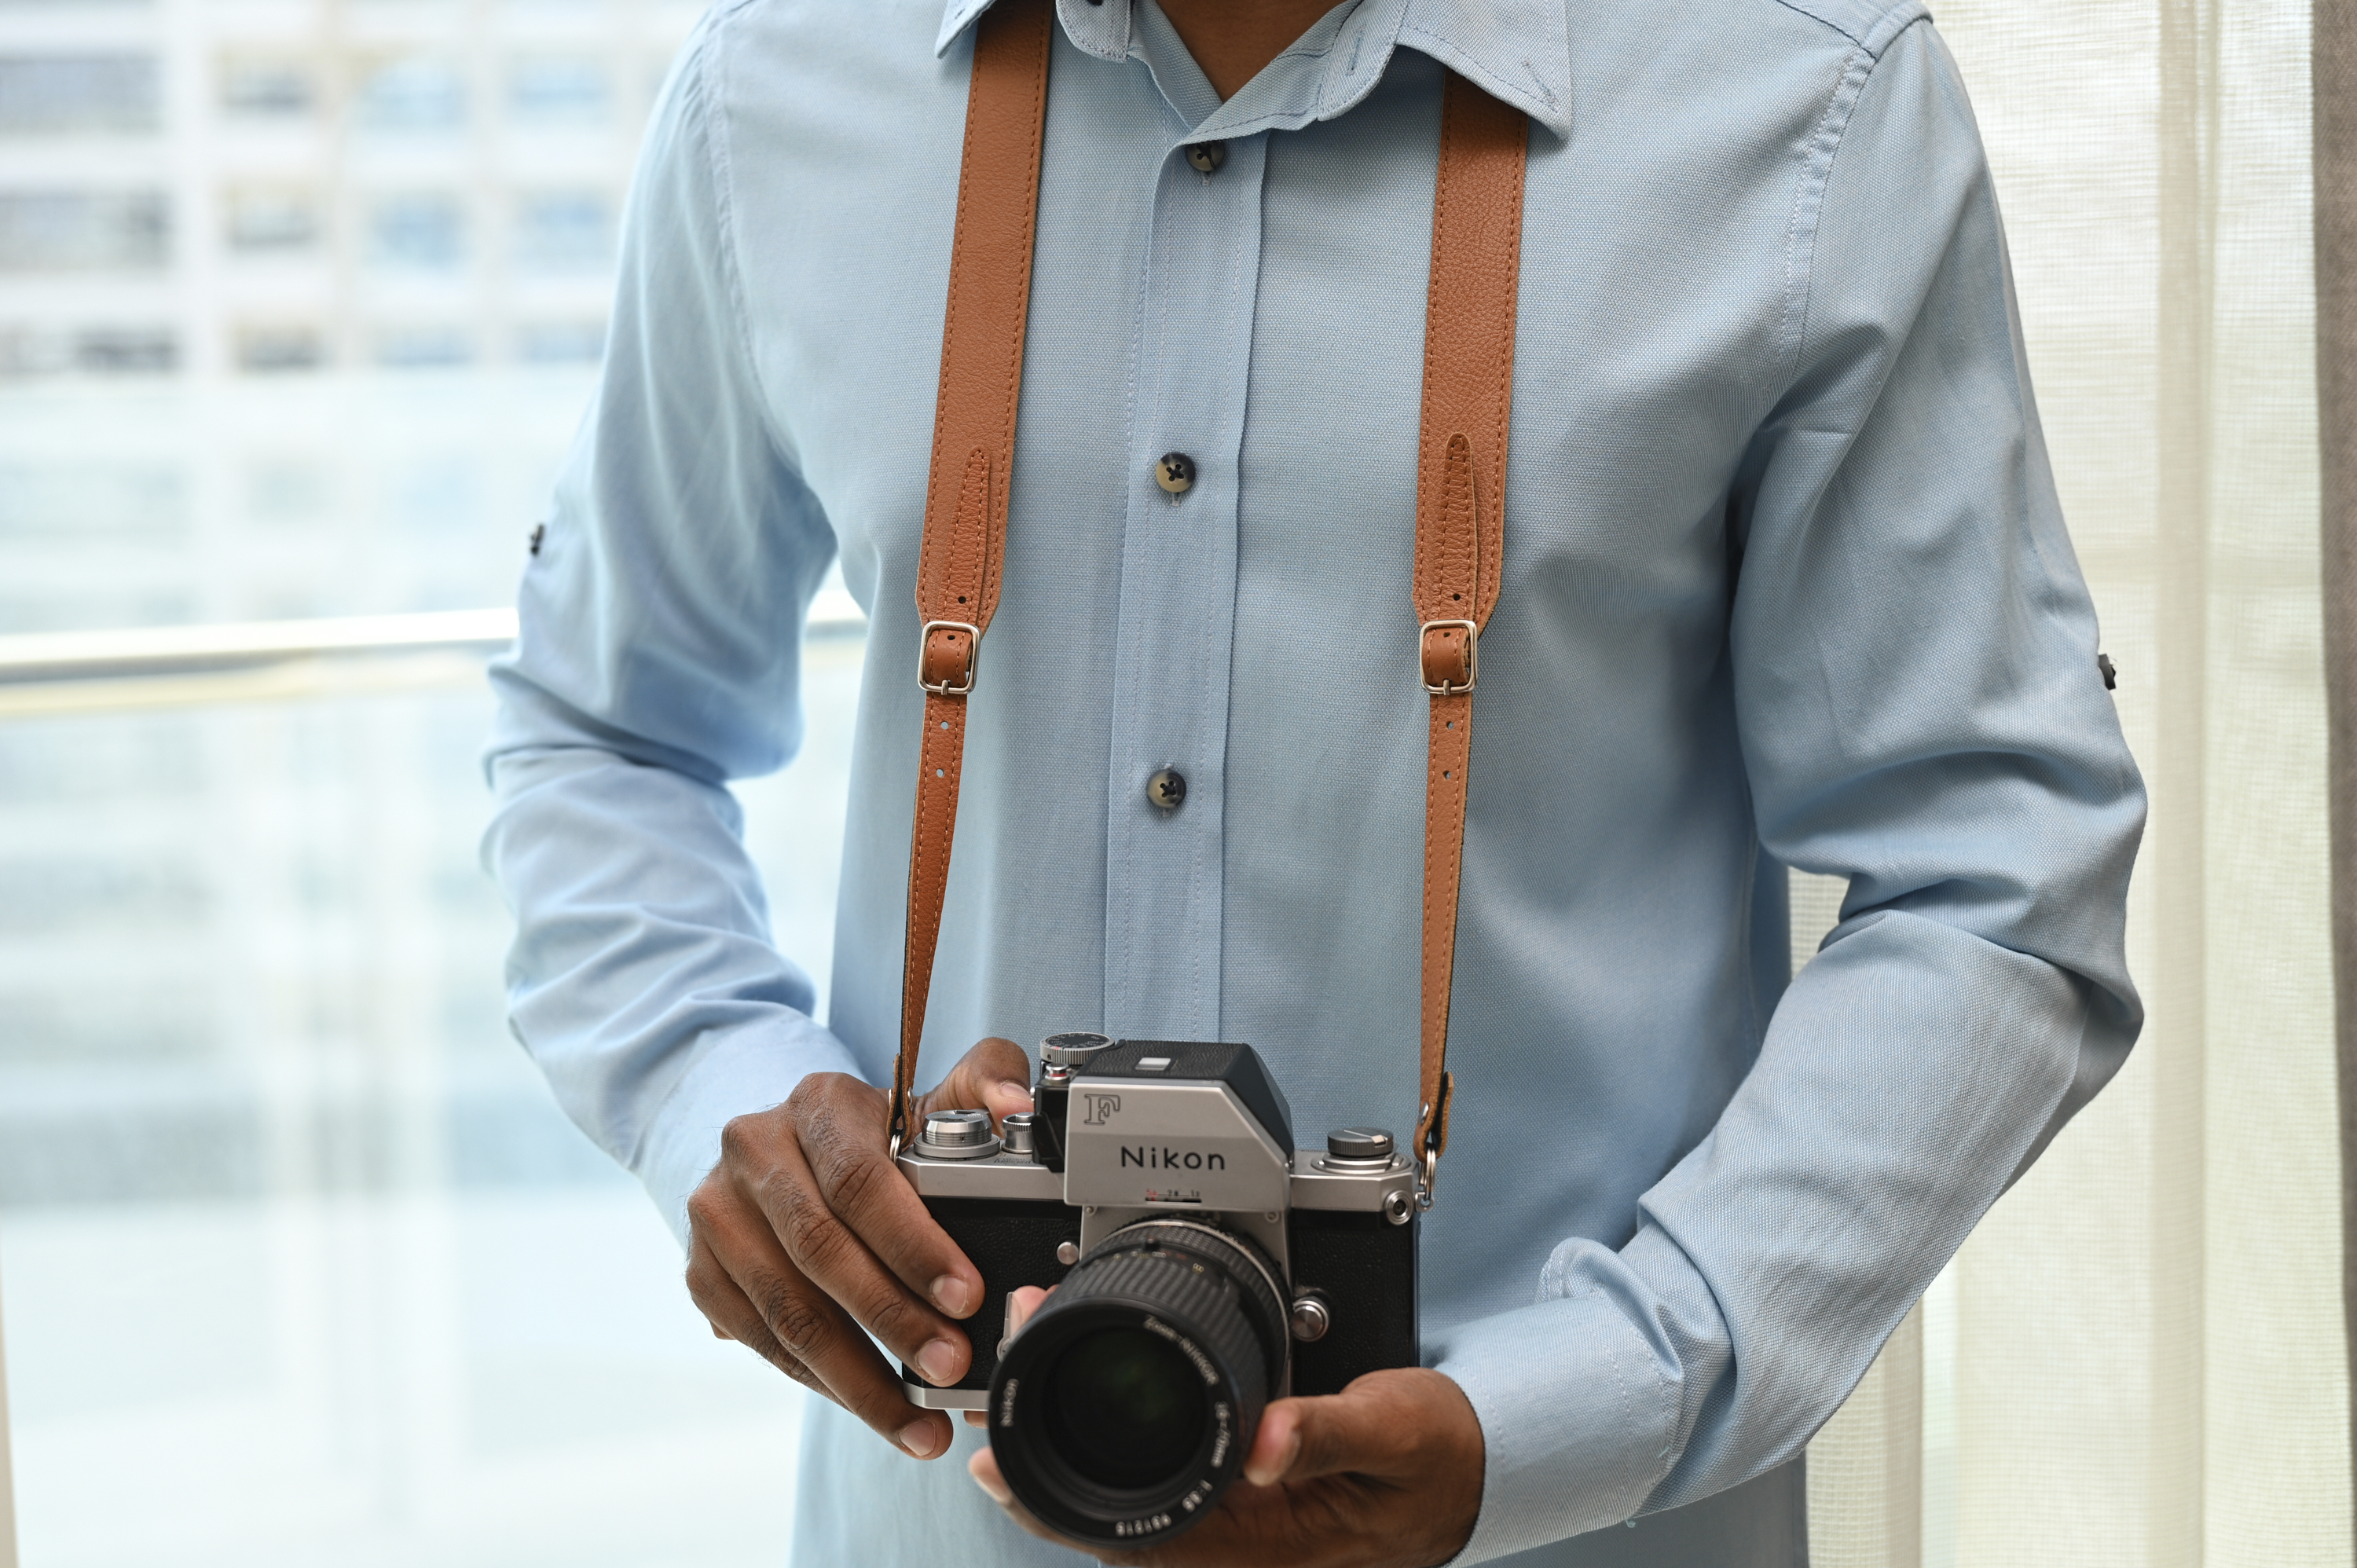 Big Chest, Small Waist : Digital Photography Review